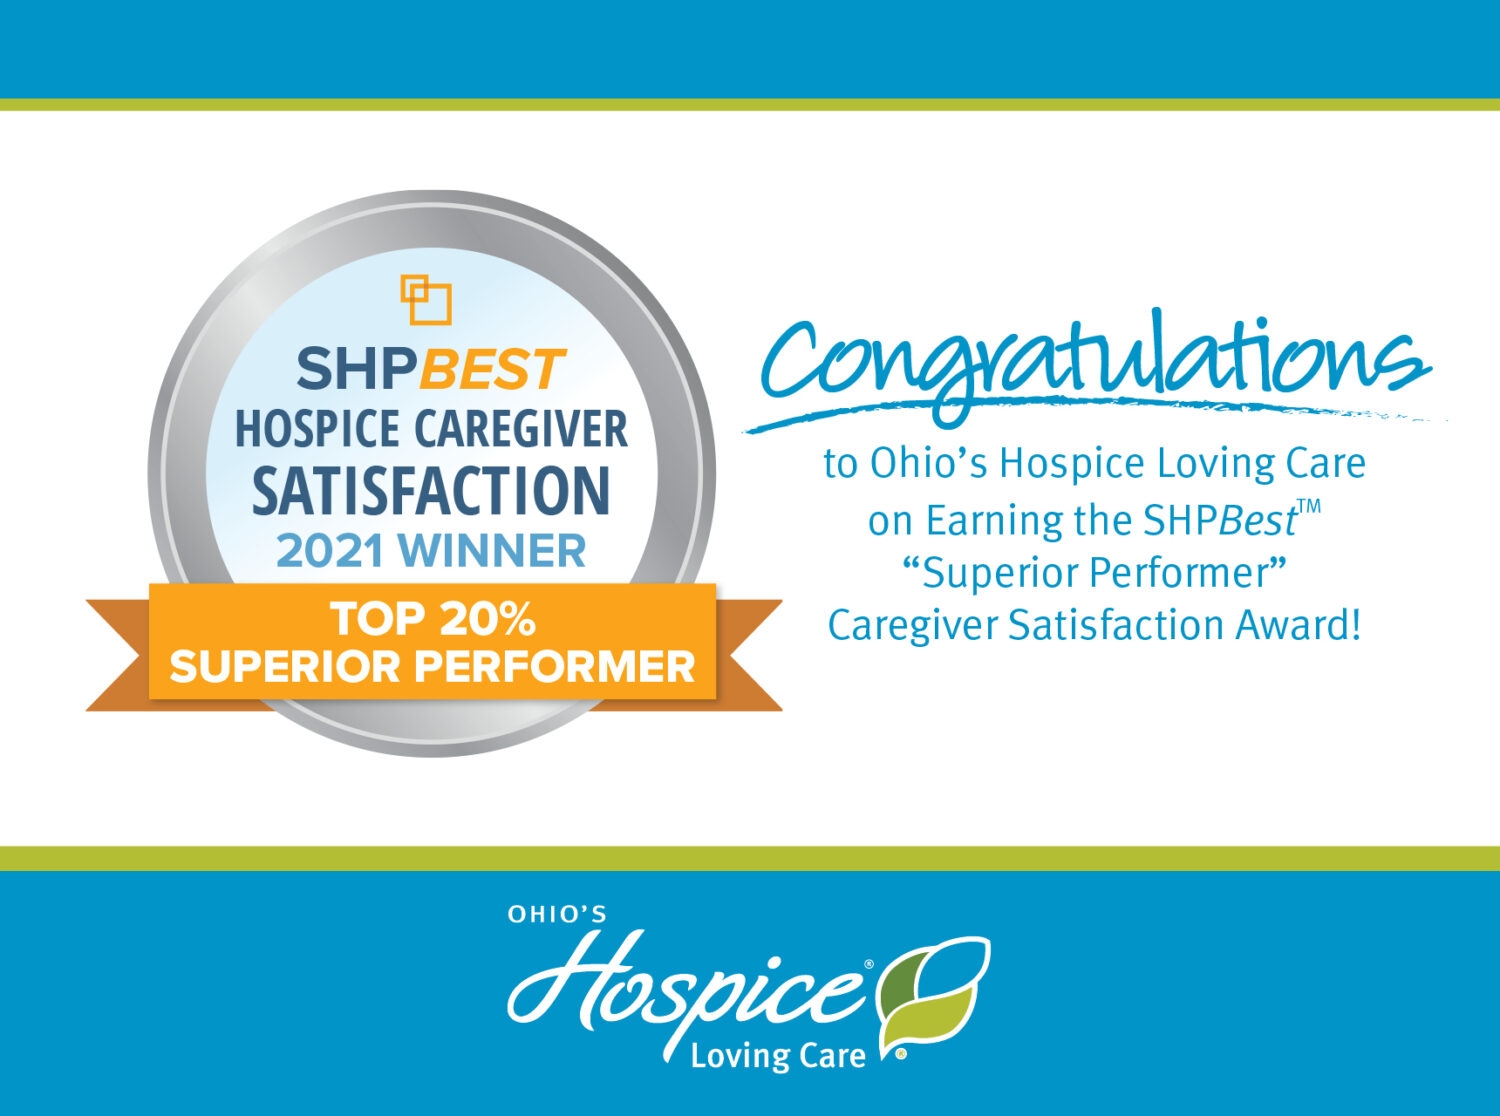 SHP Best Hospice Caregiver Satisfaction 2021 Winner Top 20 Percent Superior Performer - Congratulations to Ohio's Hospice Loving Care on Earning 